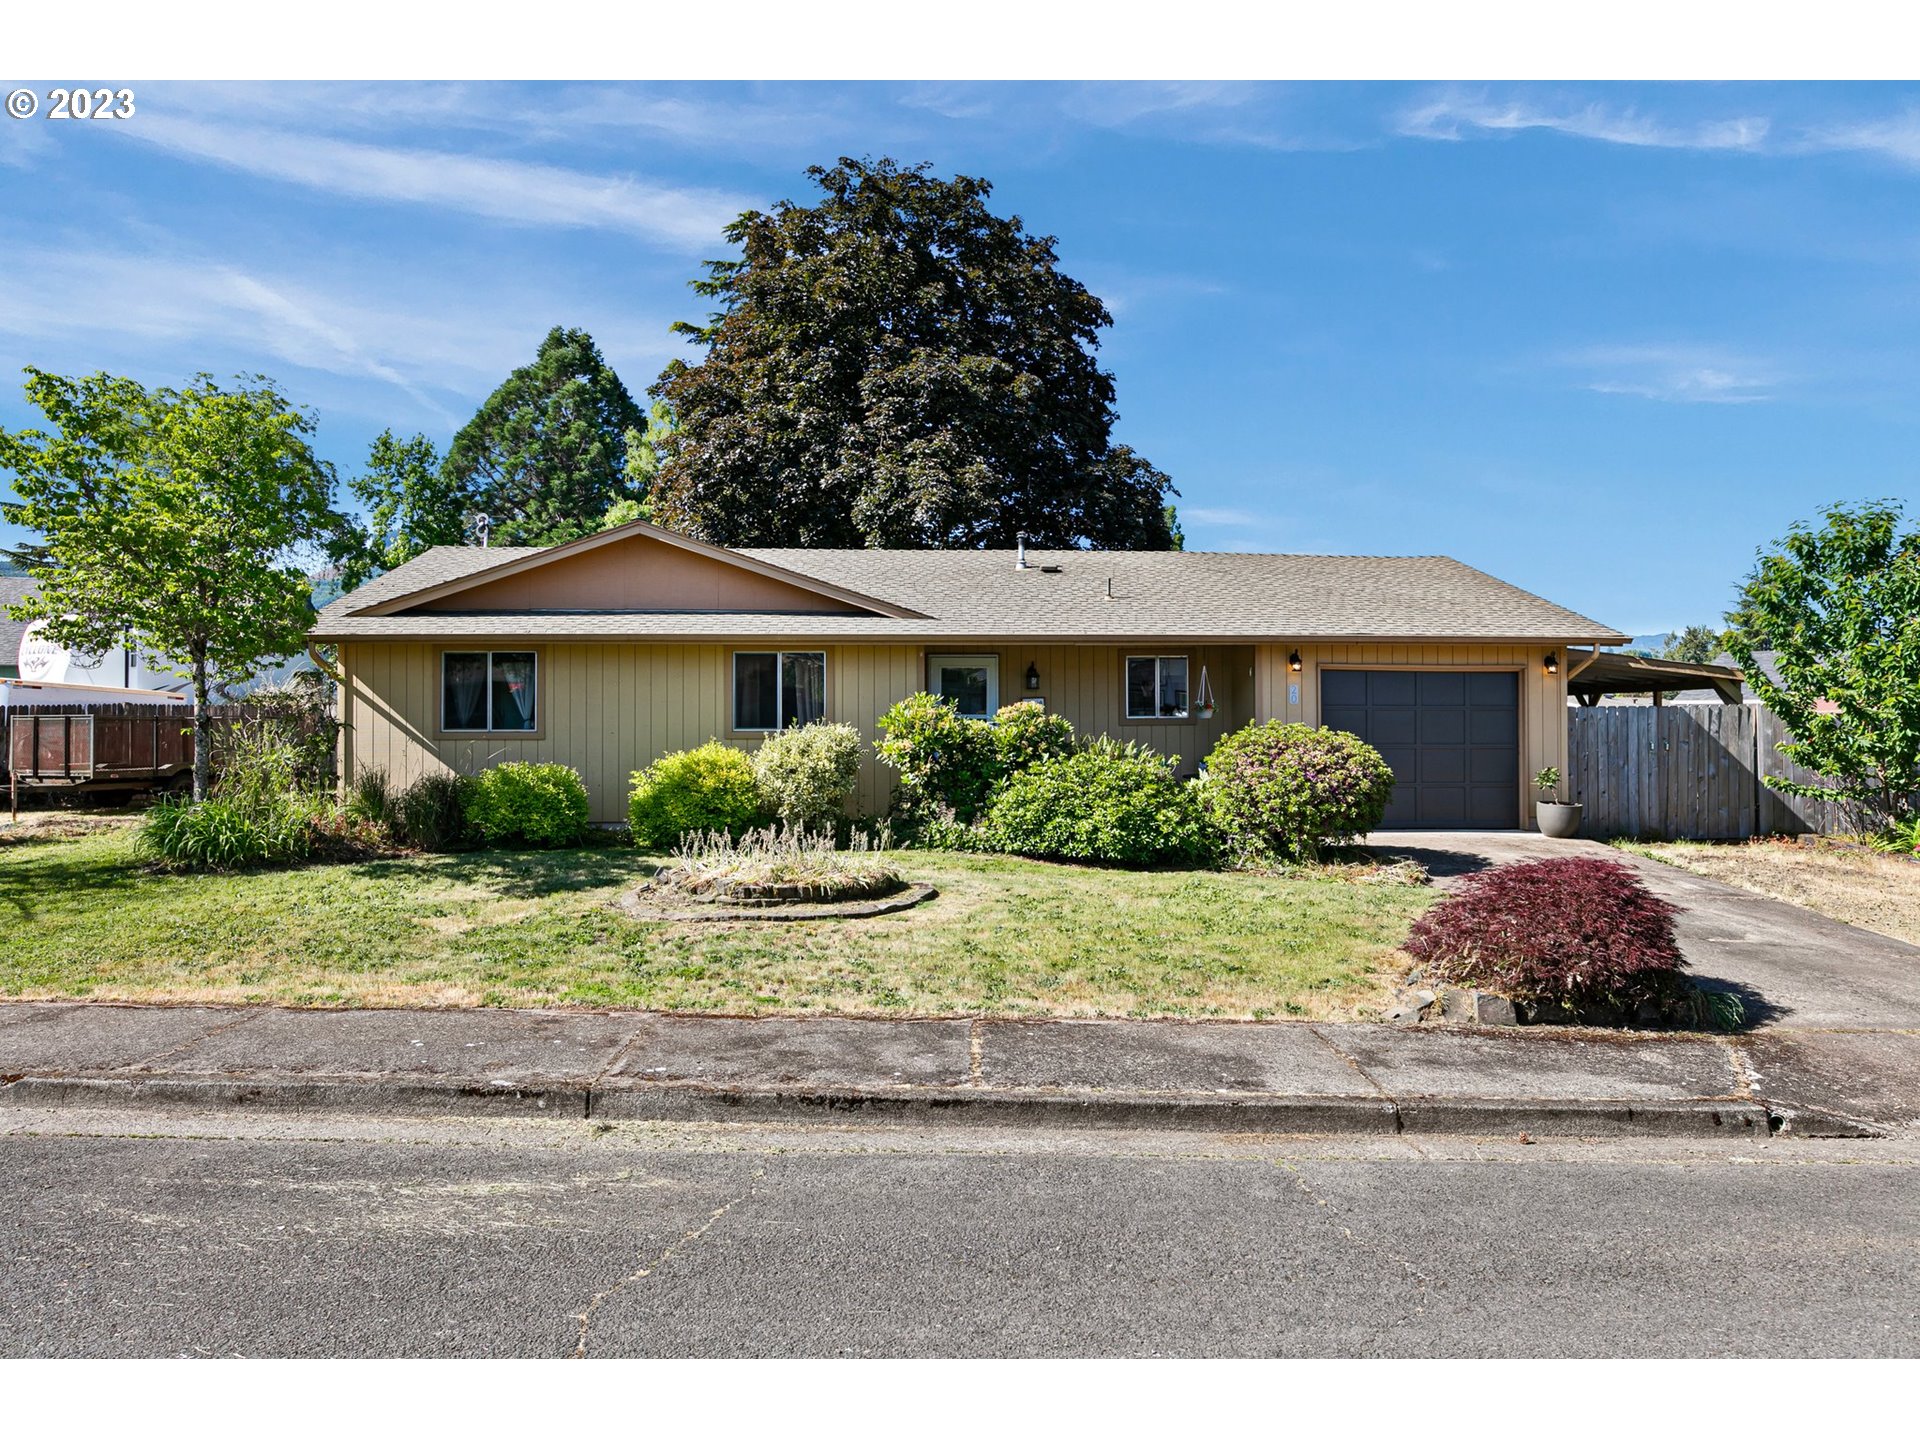 20 LOFTUS AVE, Lowell, OR 97452